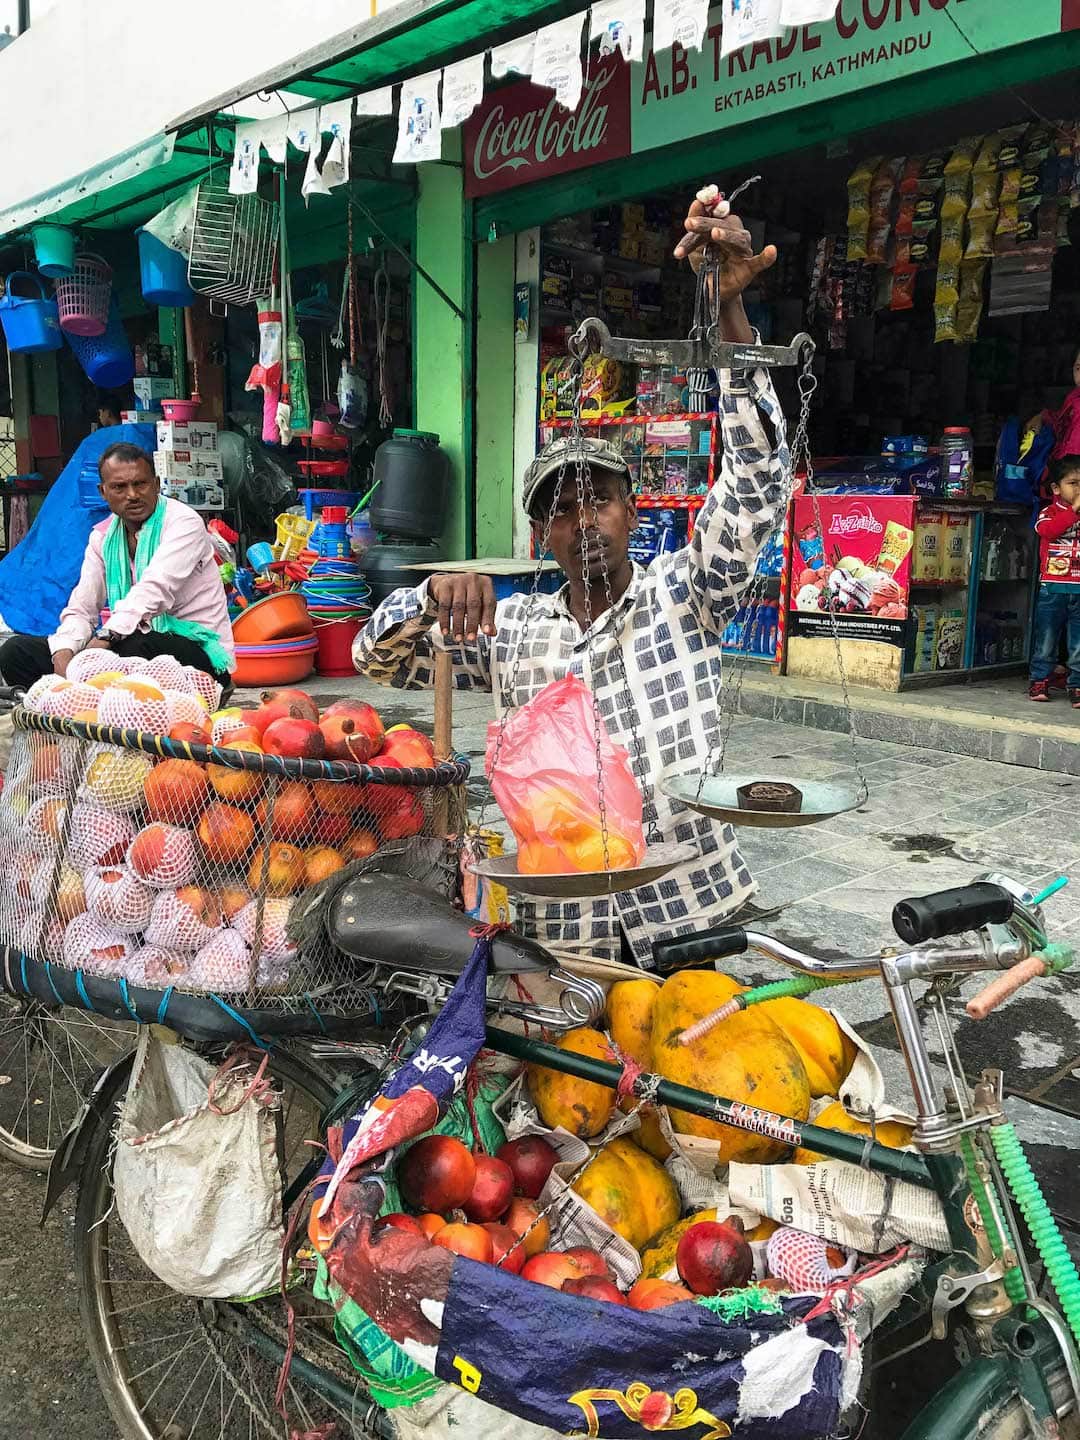 Fruit salesmen in Kathmandu. His bicycle is holding the fruit and he is weighing two mangos